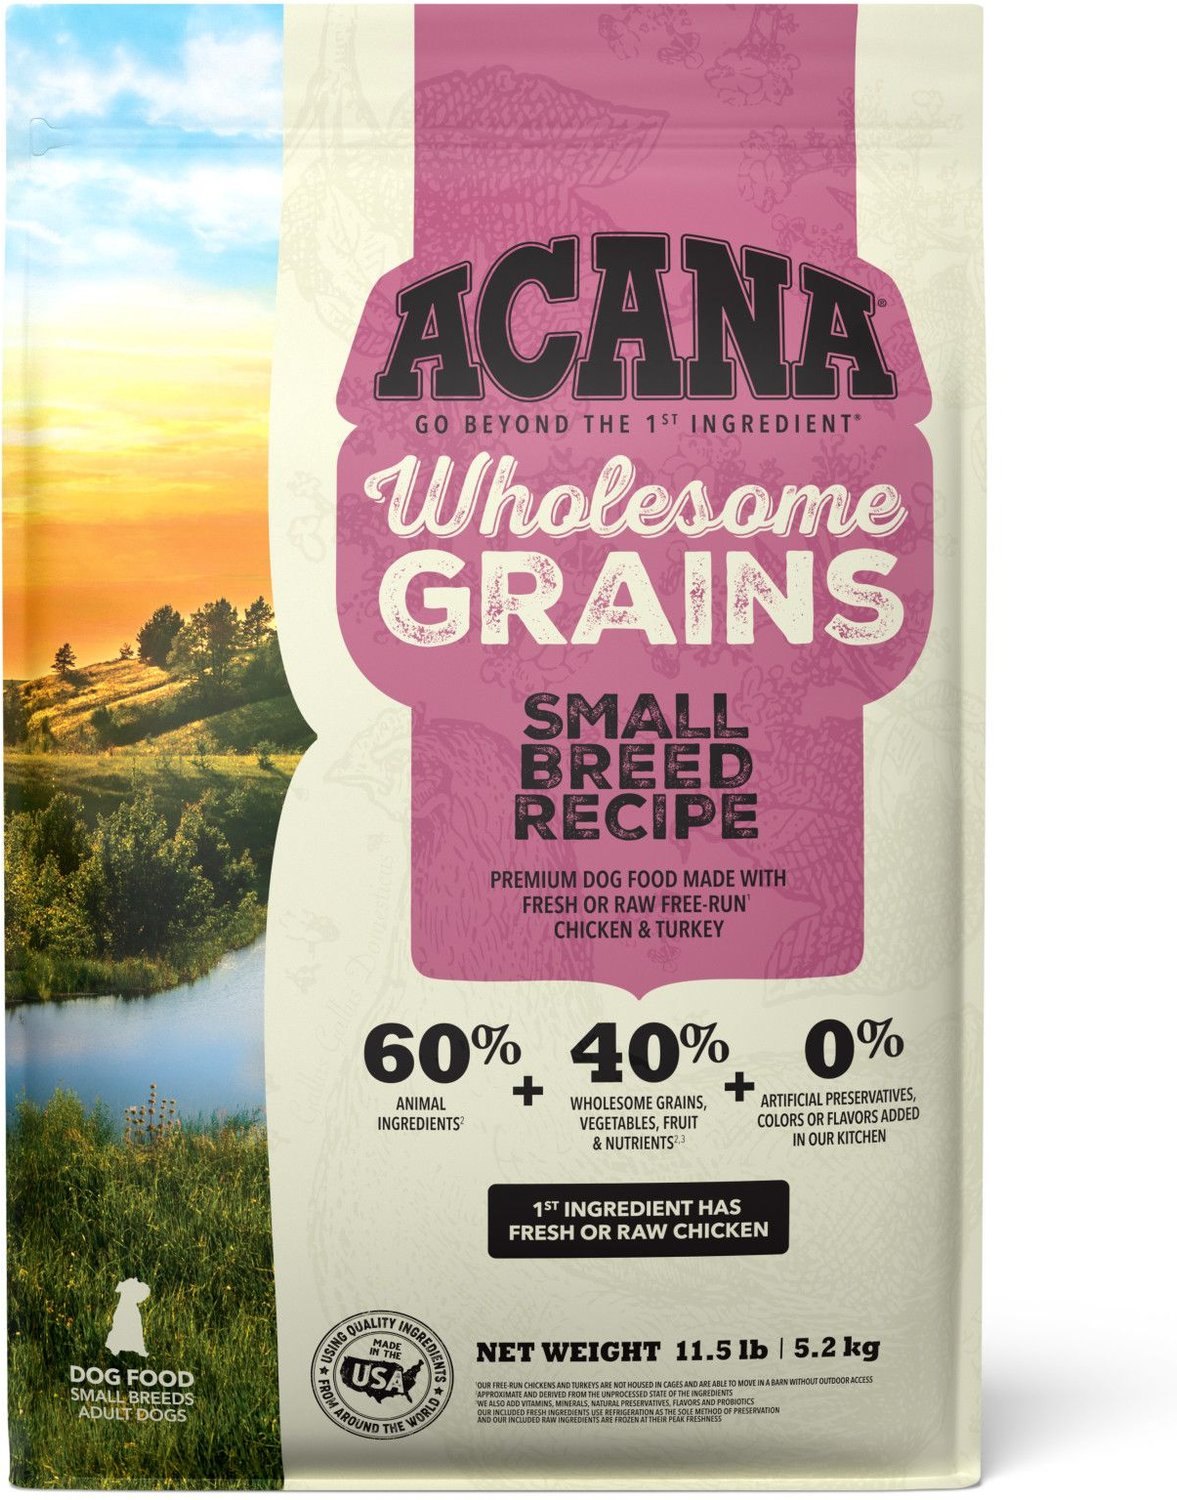 ACANA Wholesome Grains Small Breed Recipe Gluten-Free Dry Dog Food